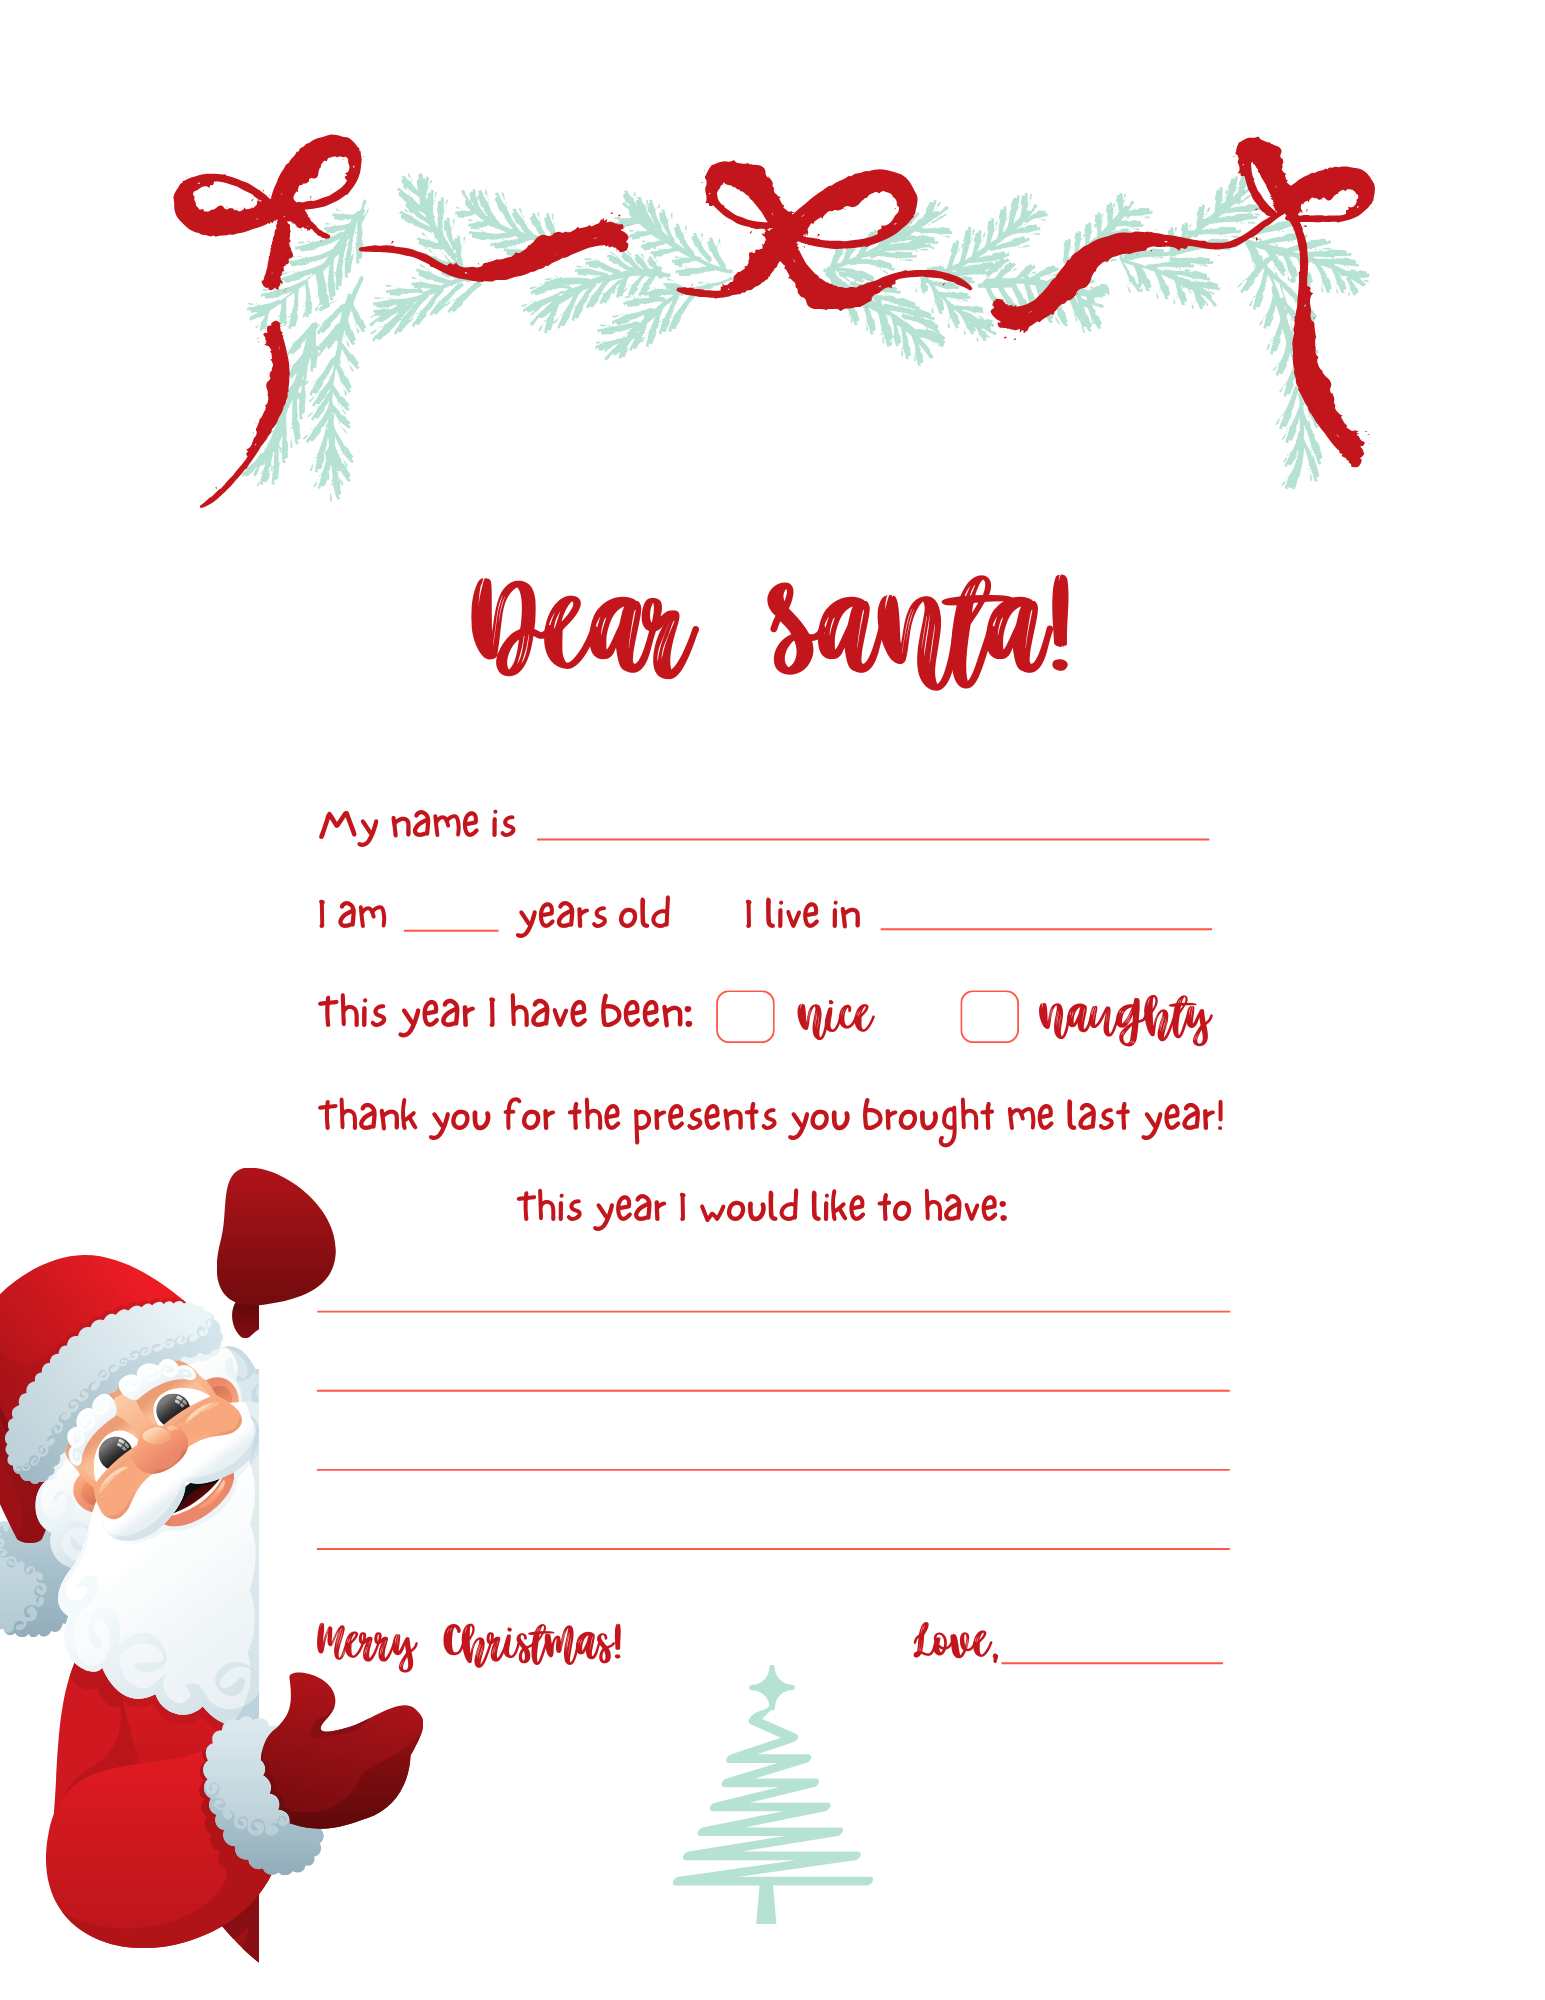 Free - Print this out for your children. It's so fun to have them fill out for Santa.